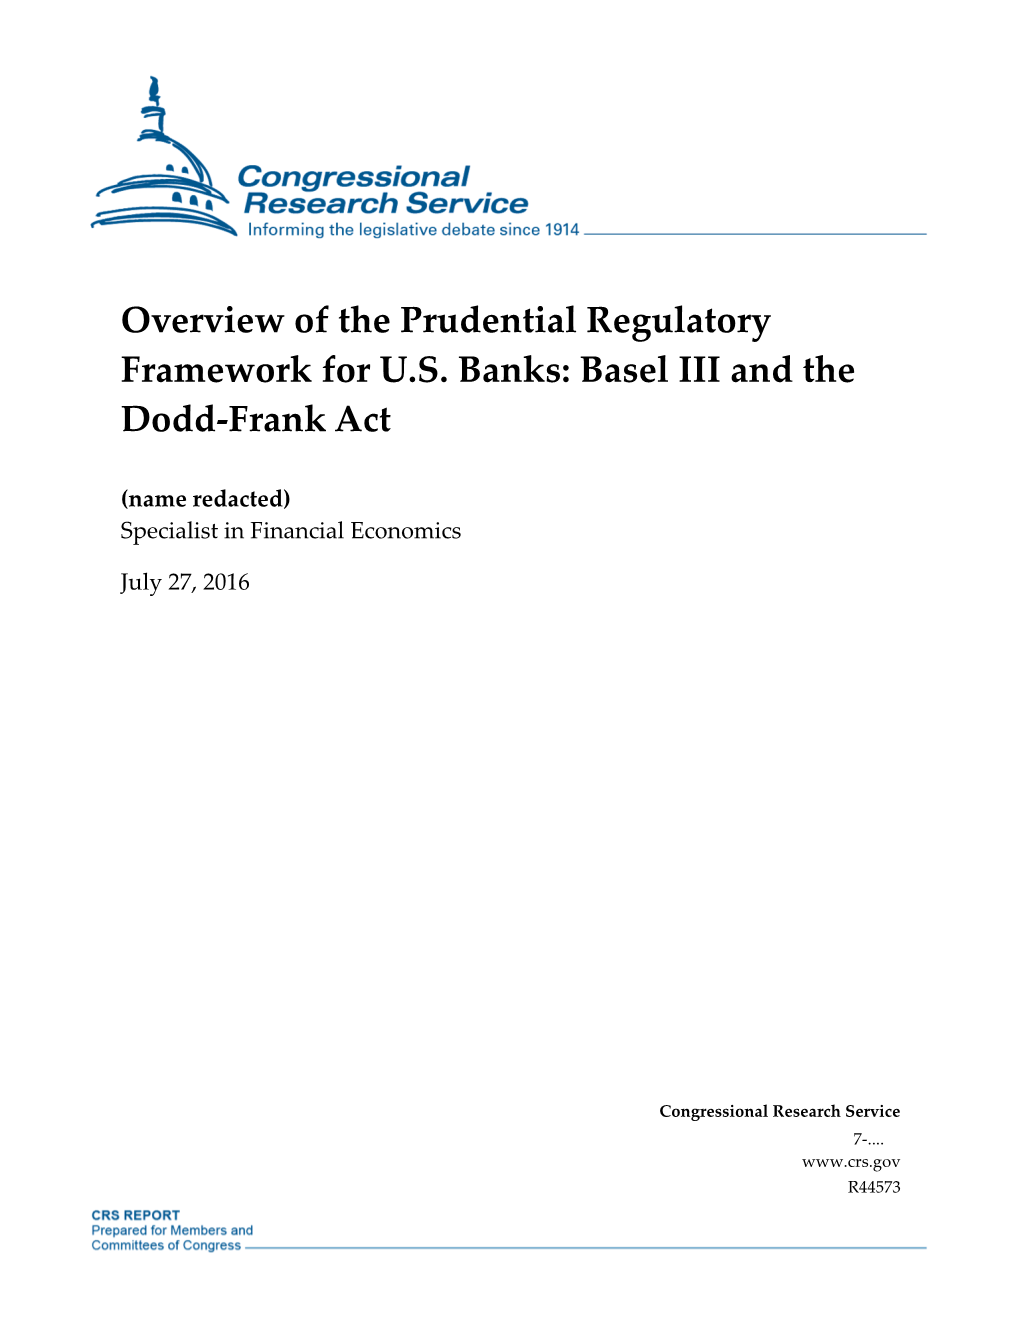 Overview of the Prudential Regulatory Framework for U.S. Banks: Basel III and the Dodd-Frank Act